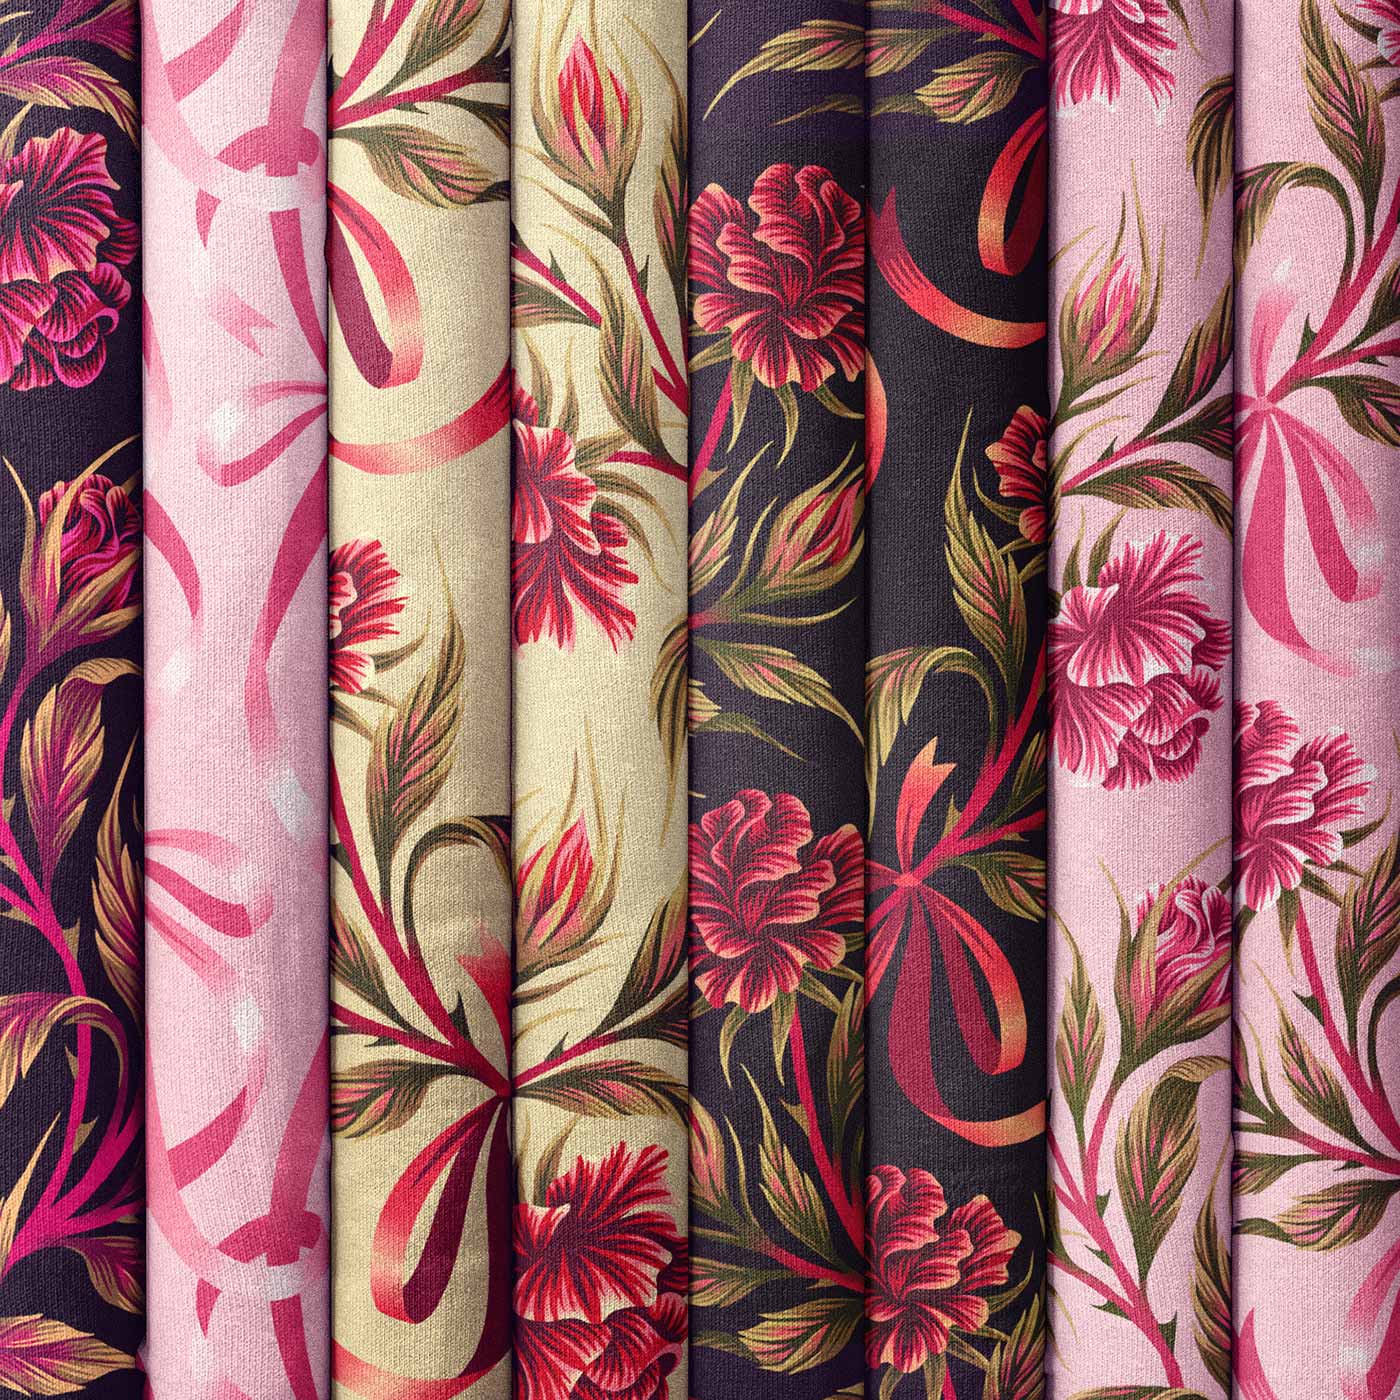 Collection of Rose patterned fabrics by Andrea Muller